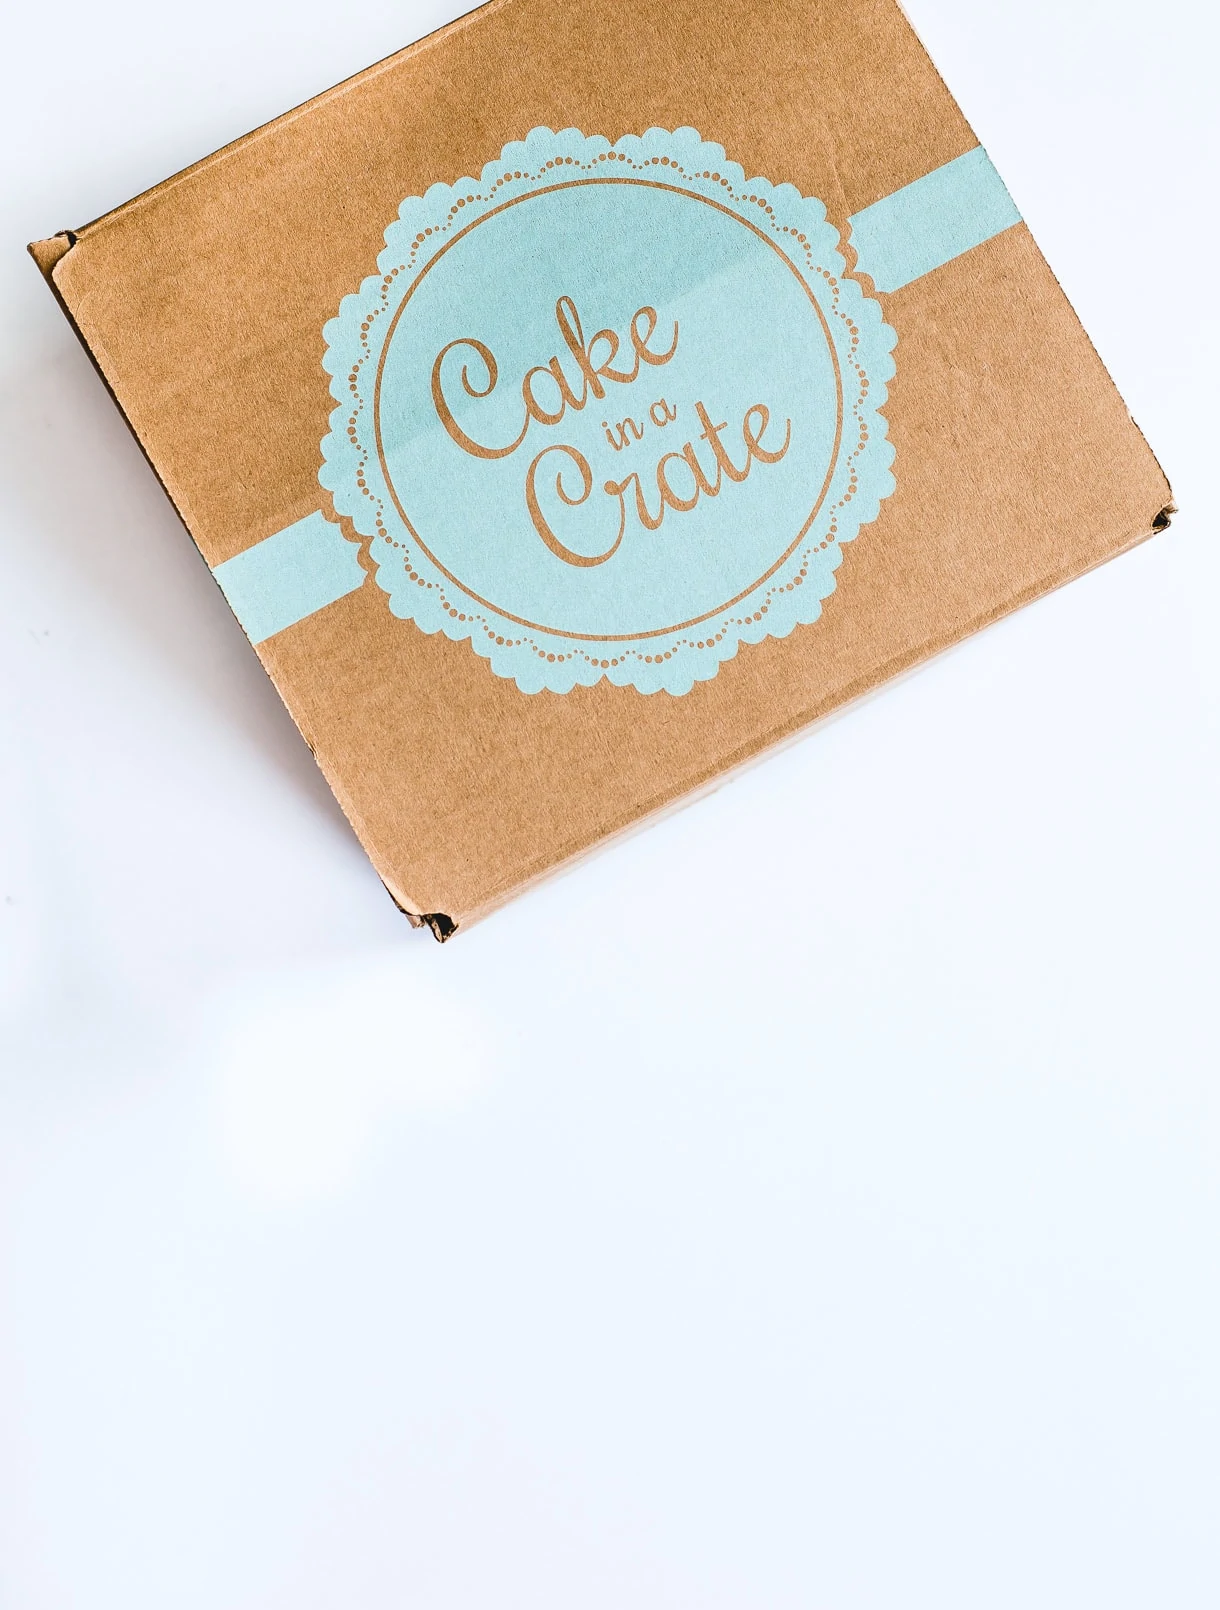 Order your Cake in a Crate!